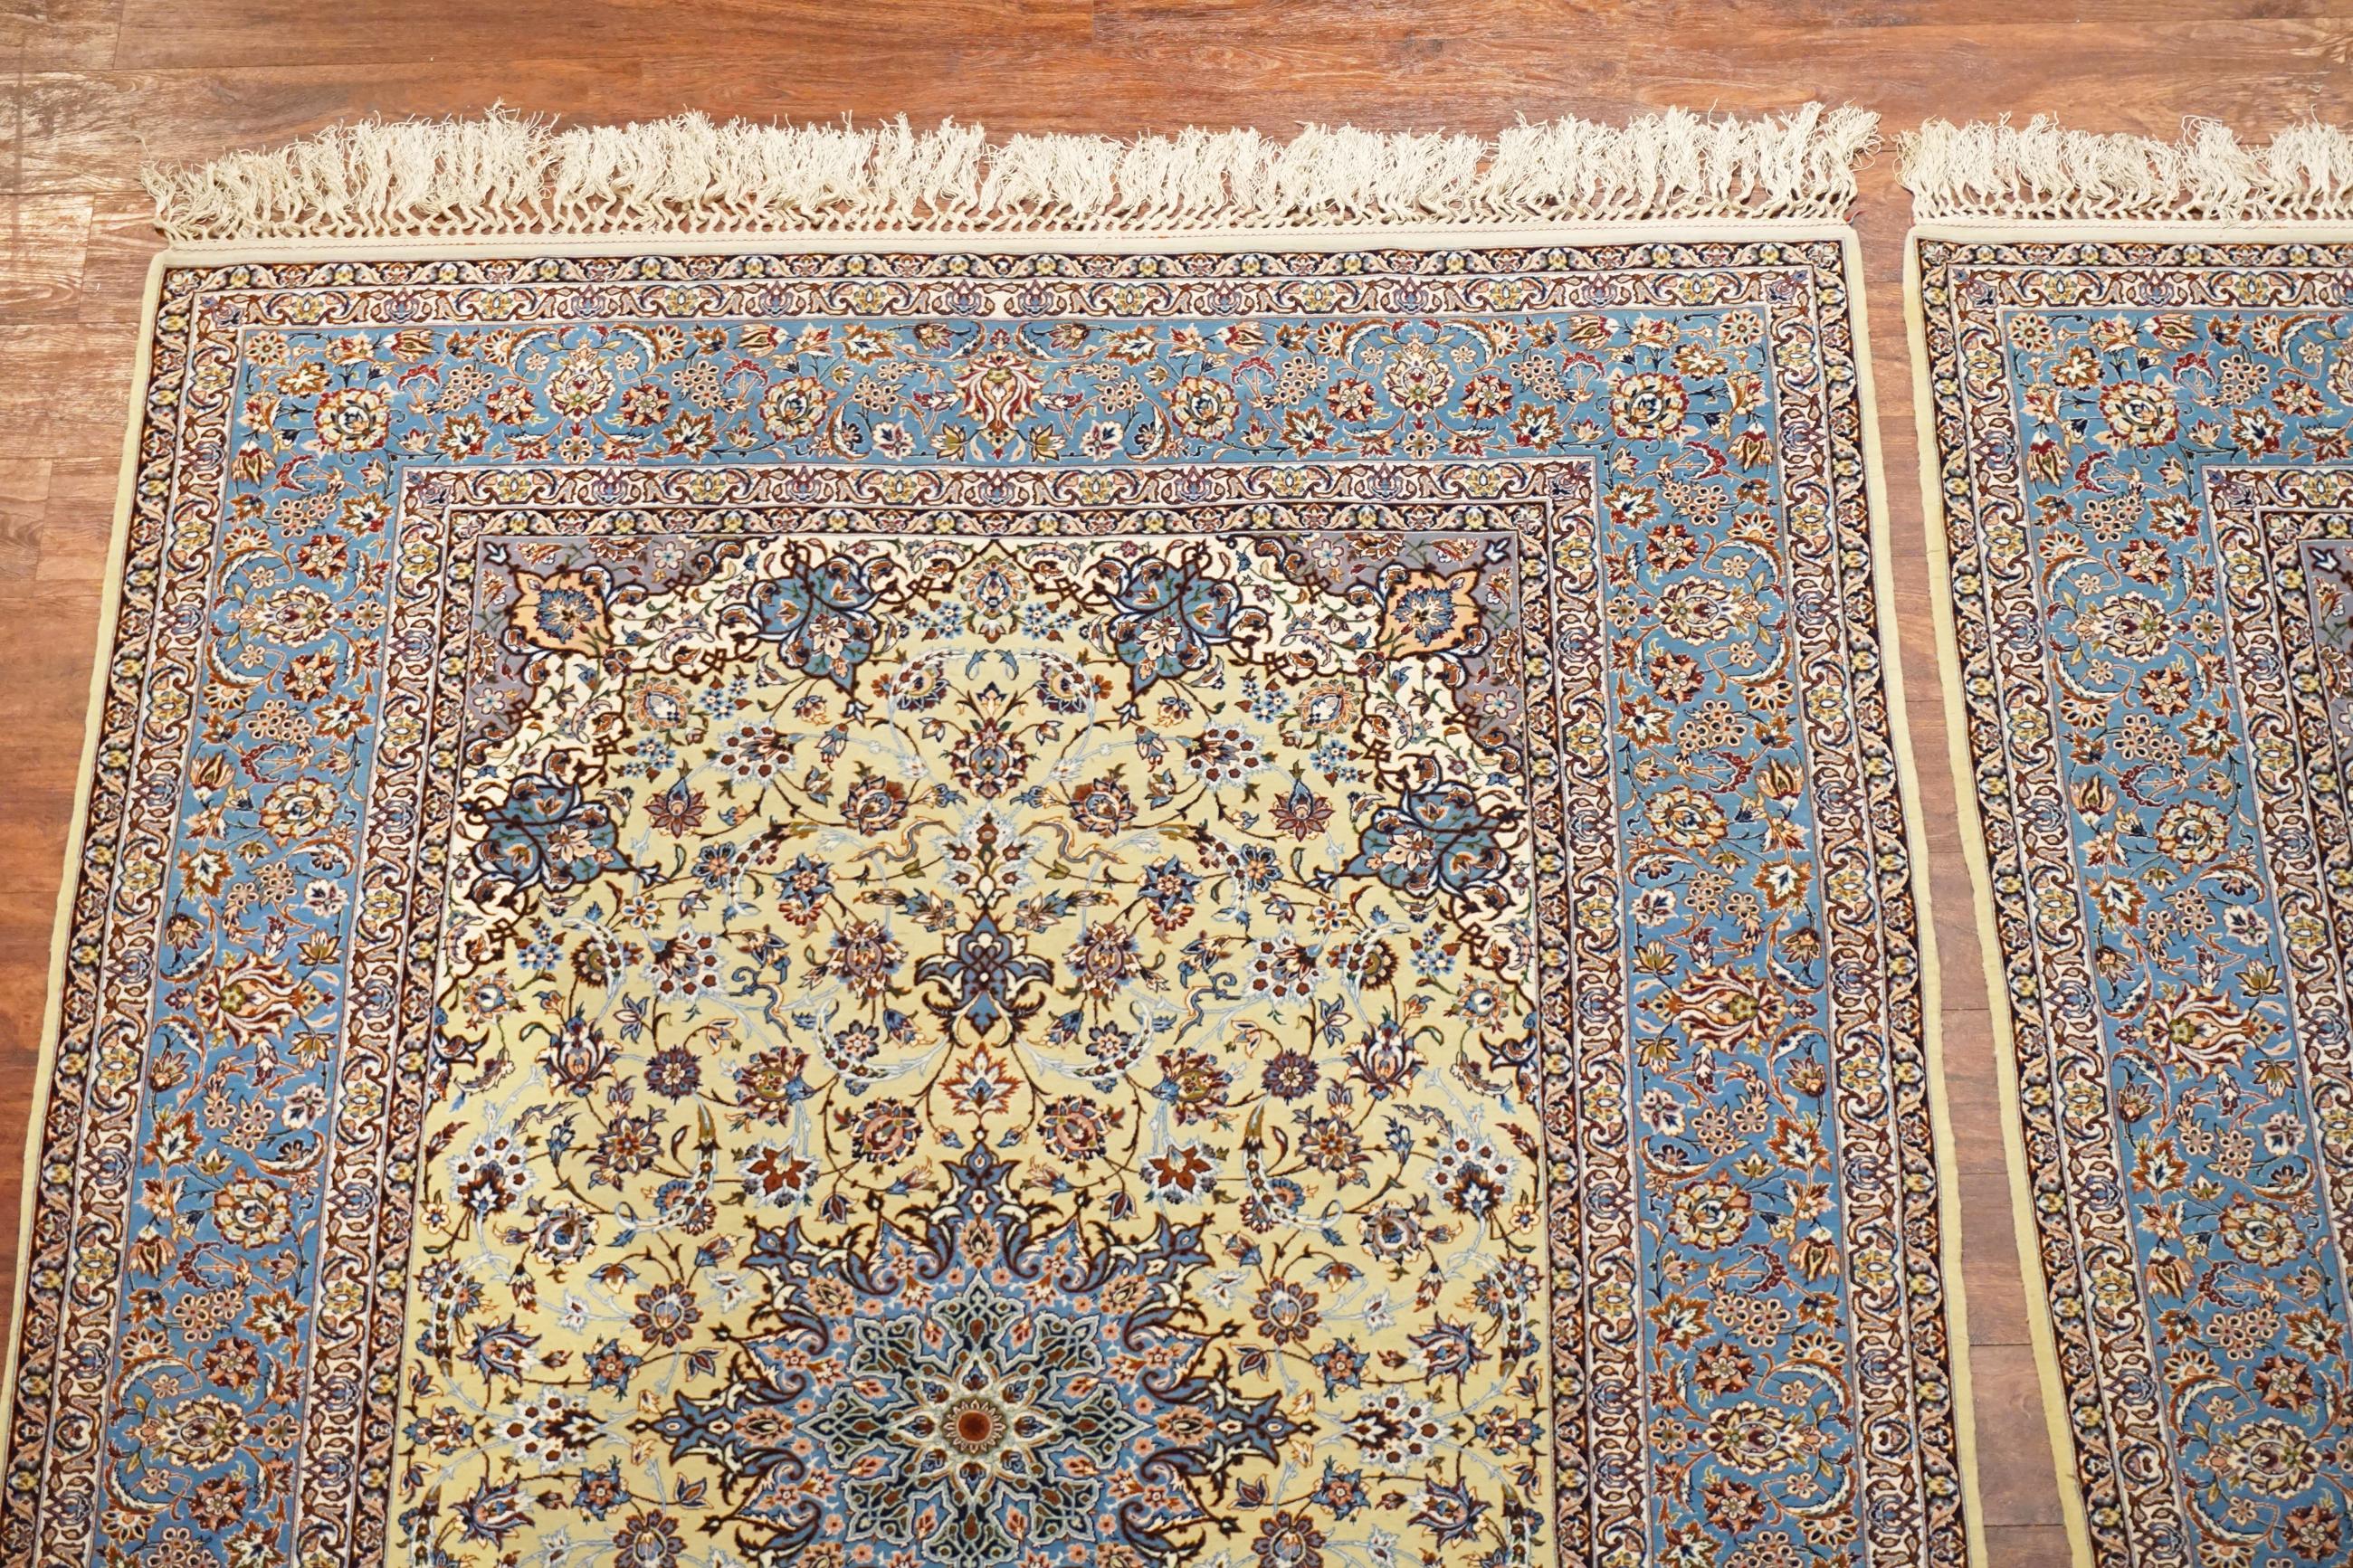 Pair of Vintage Wool and Silk Persian Isfahan Rugs In Excellent Condition For Sale In Laguna Hills, CA